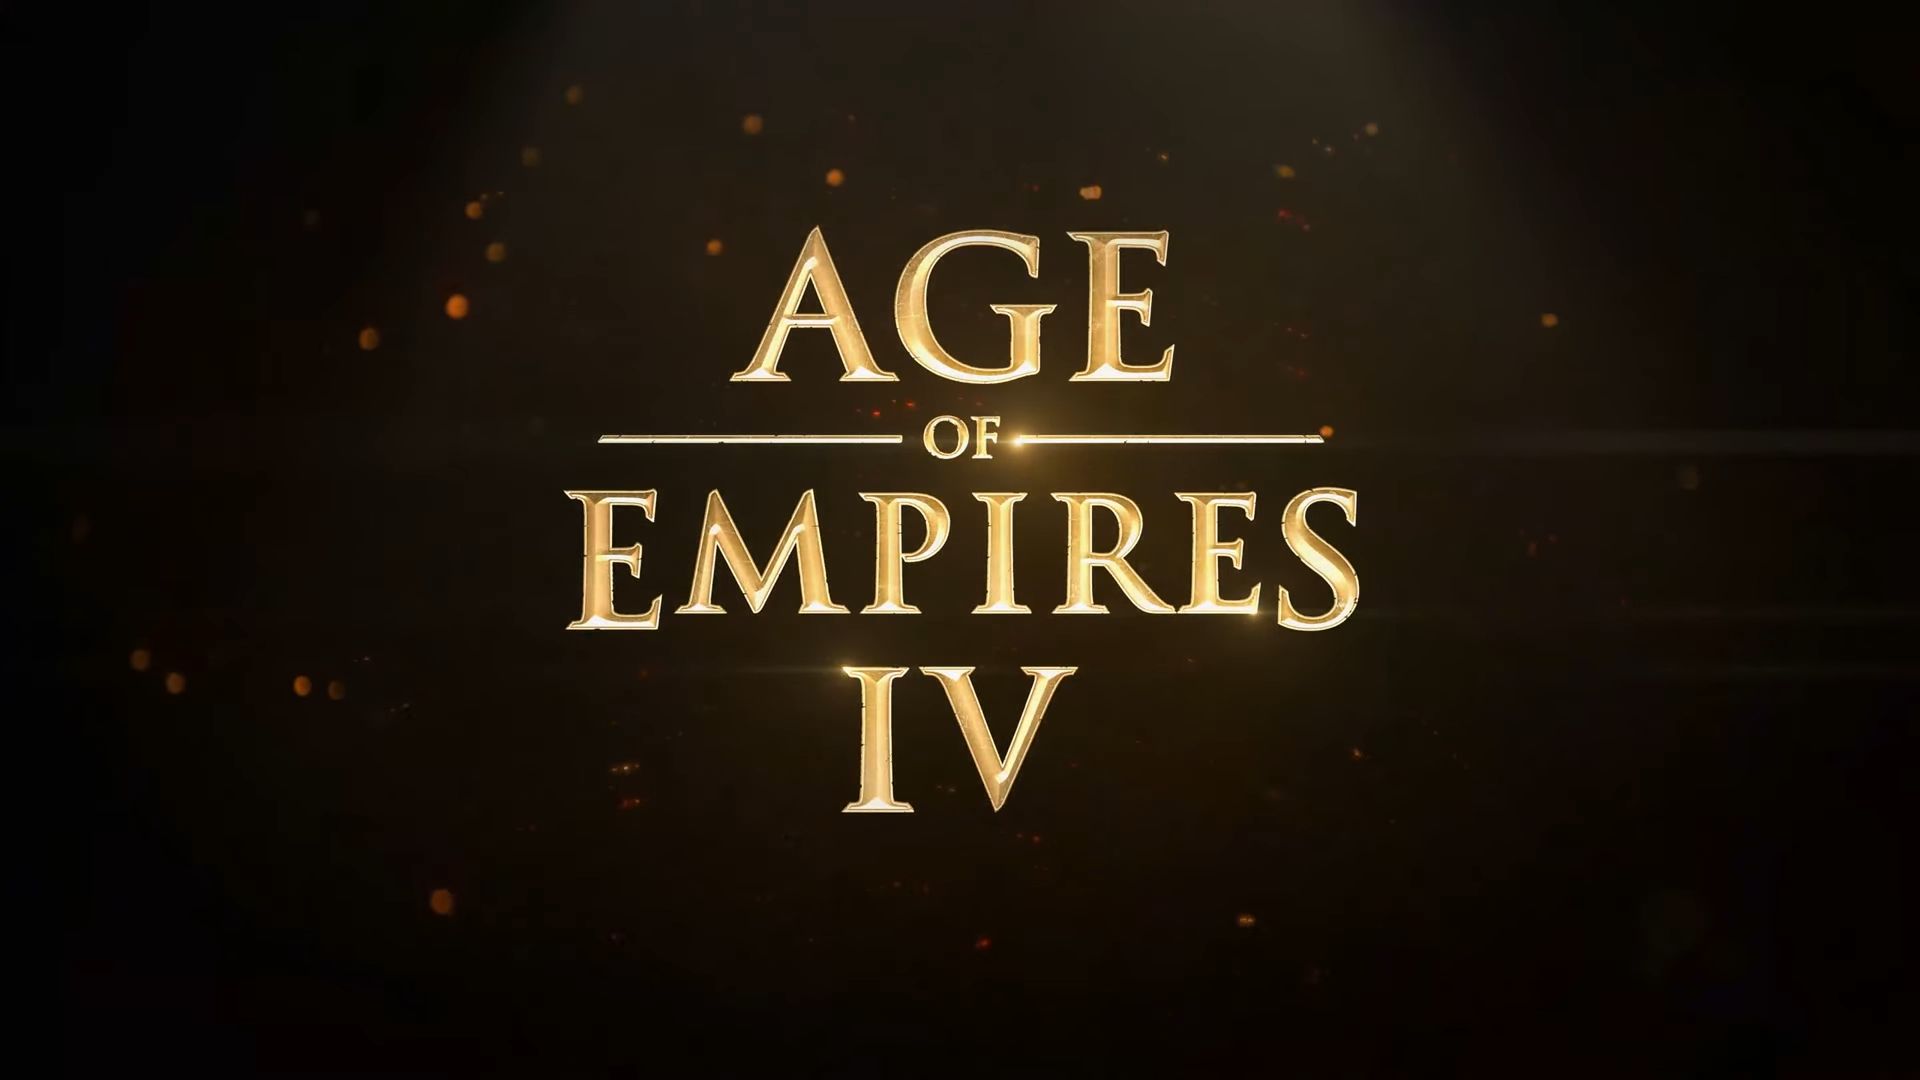 Age of Empires 4 Gameplay Trailer Showcases Huge Battles